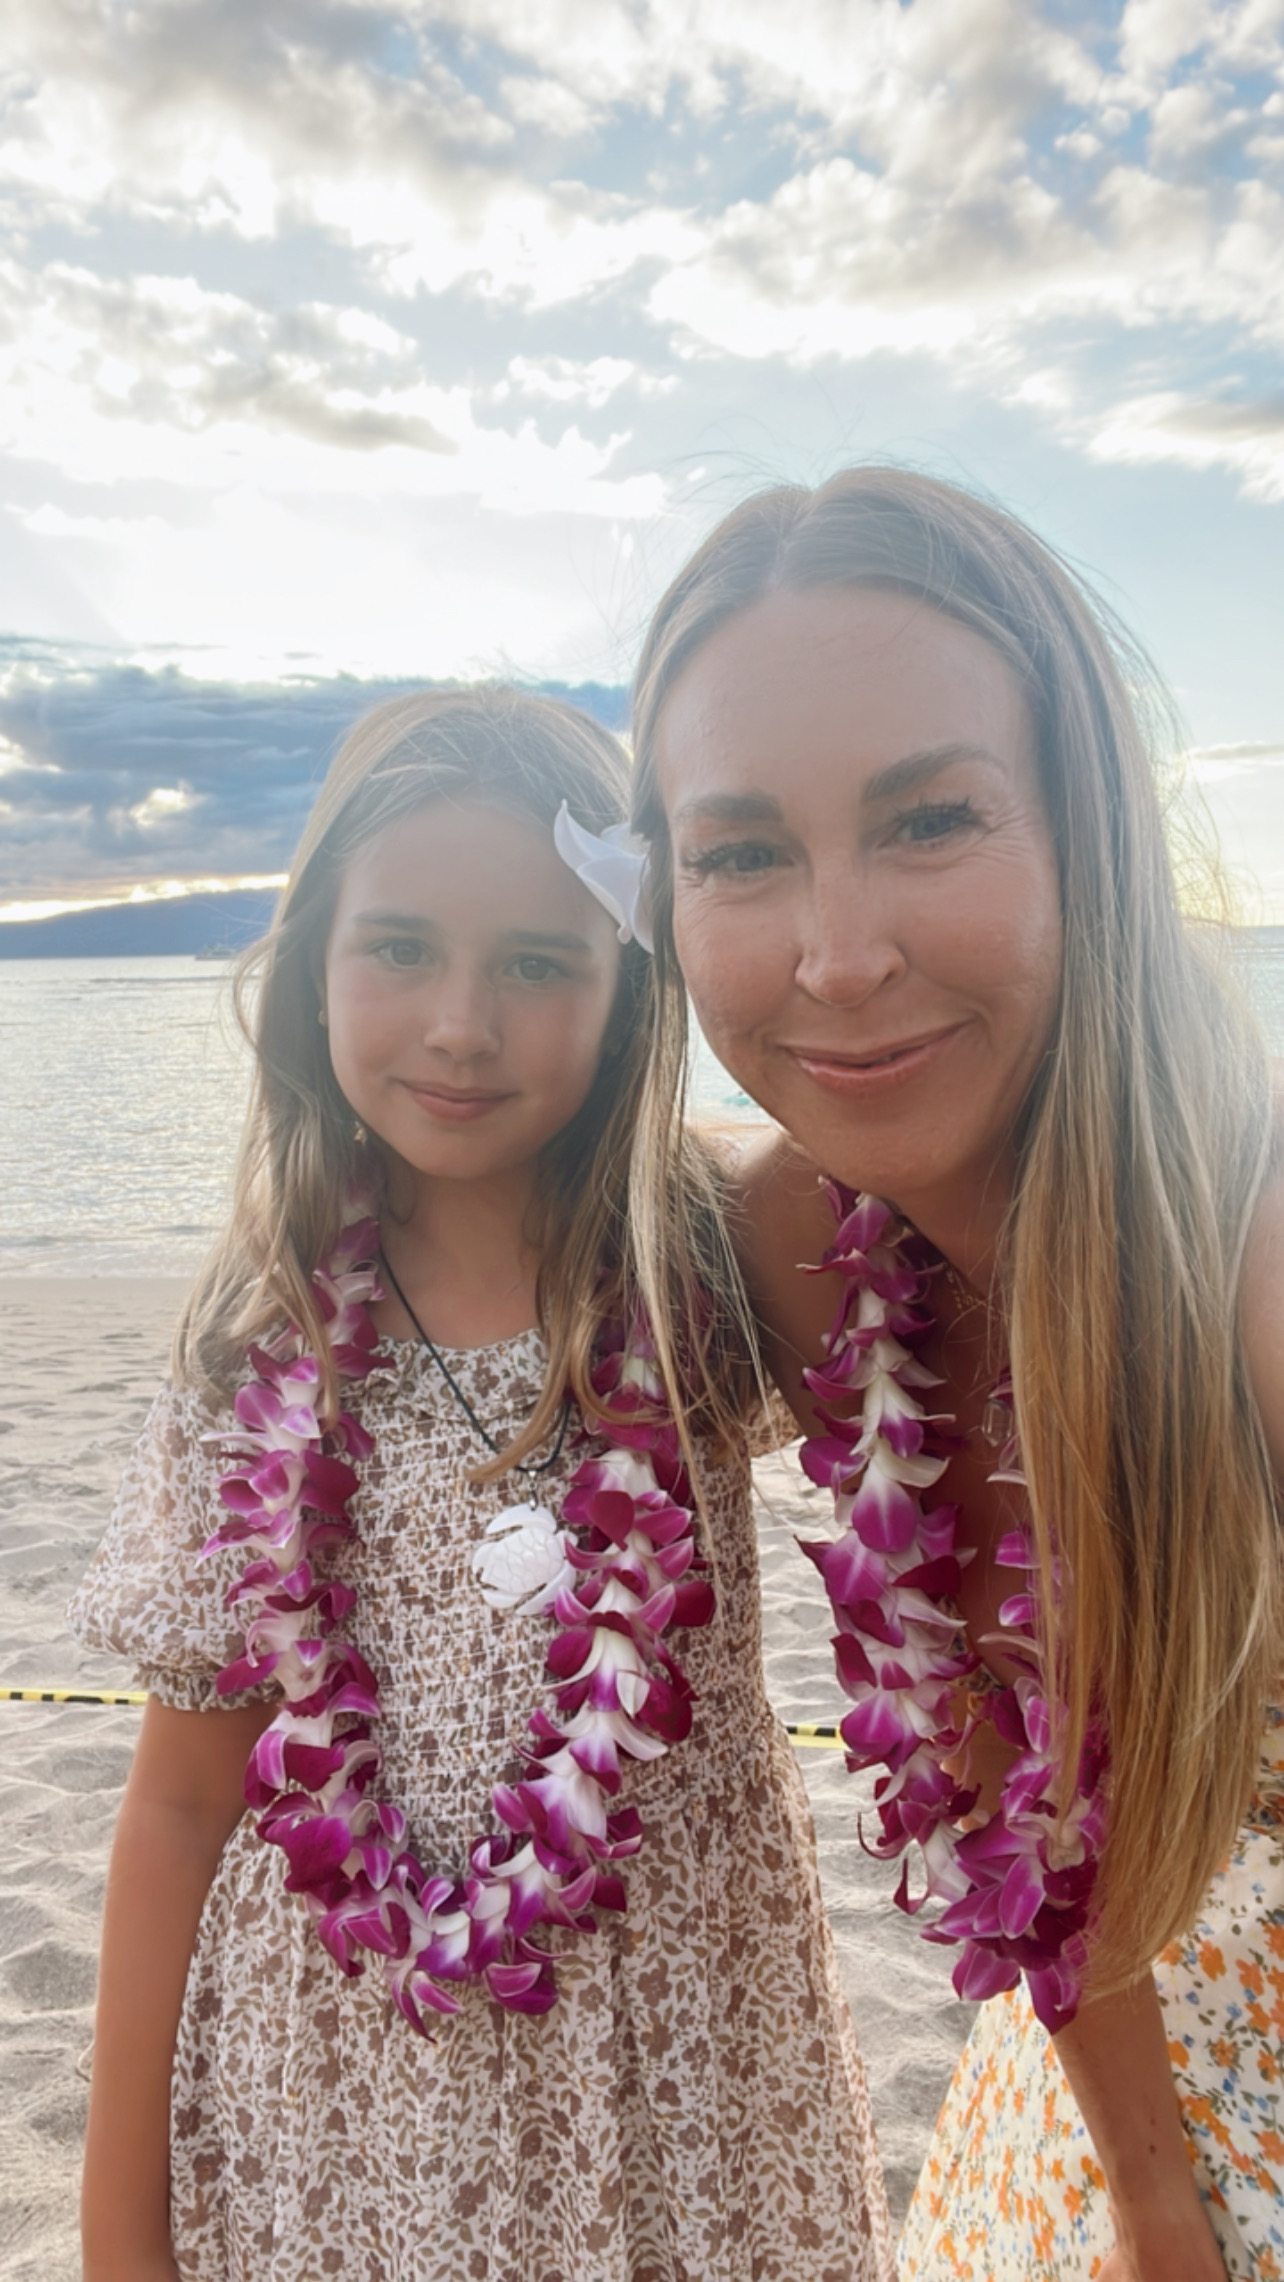 celebrating a luau together with my little island girl in maui #lahaina #hawaii #theldltravels